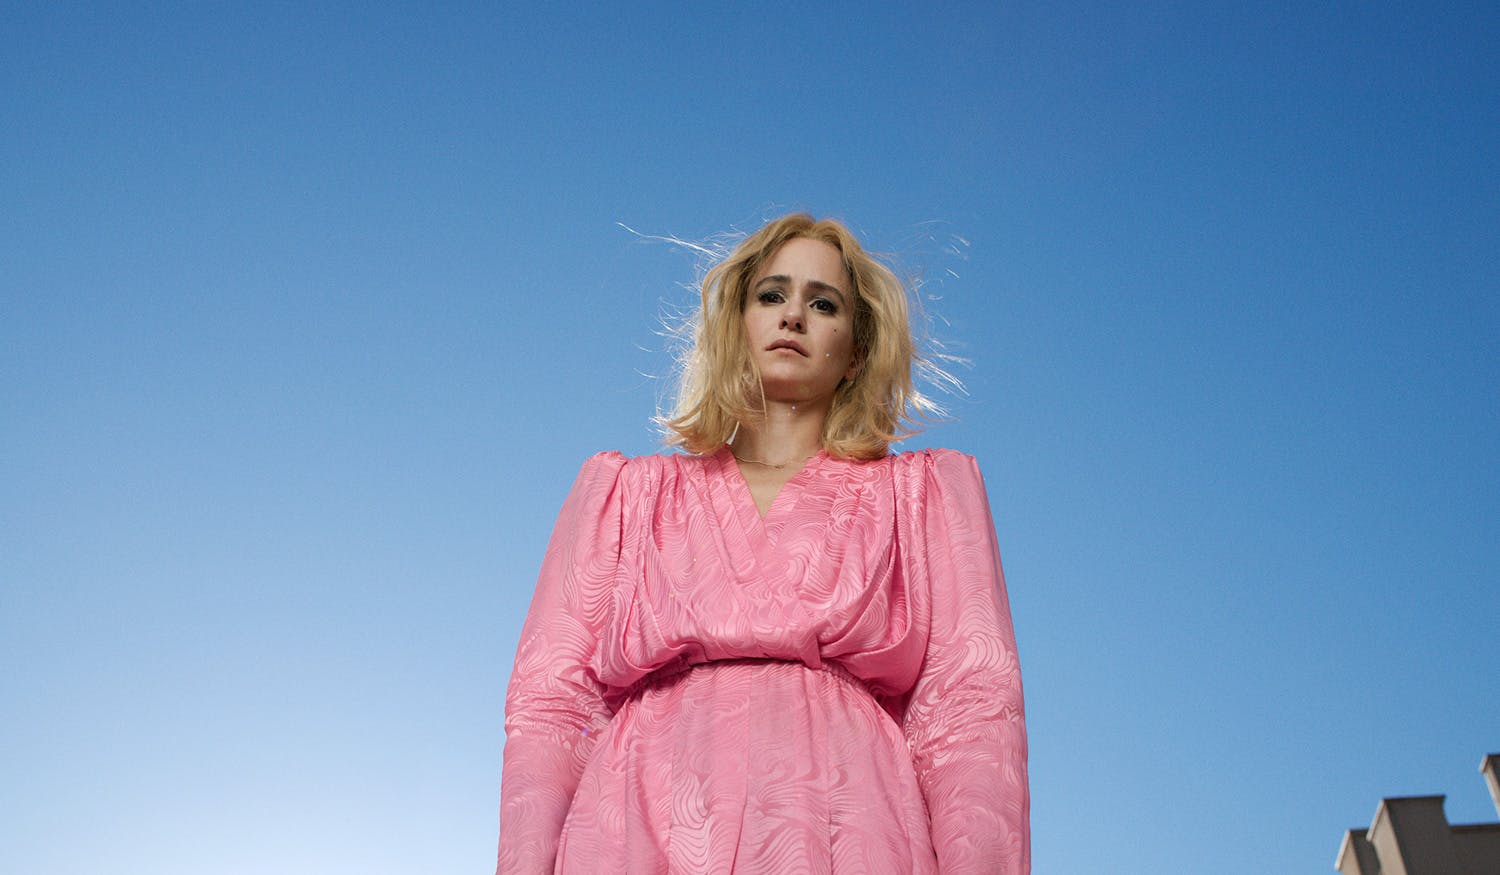 Image by Alex Prager shows a photograph of the character Cecily, who has blonde hair and is wearing a pink dress with a puffy torso and sleeves, stood against a bright blue sky backdrop